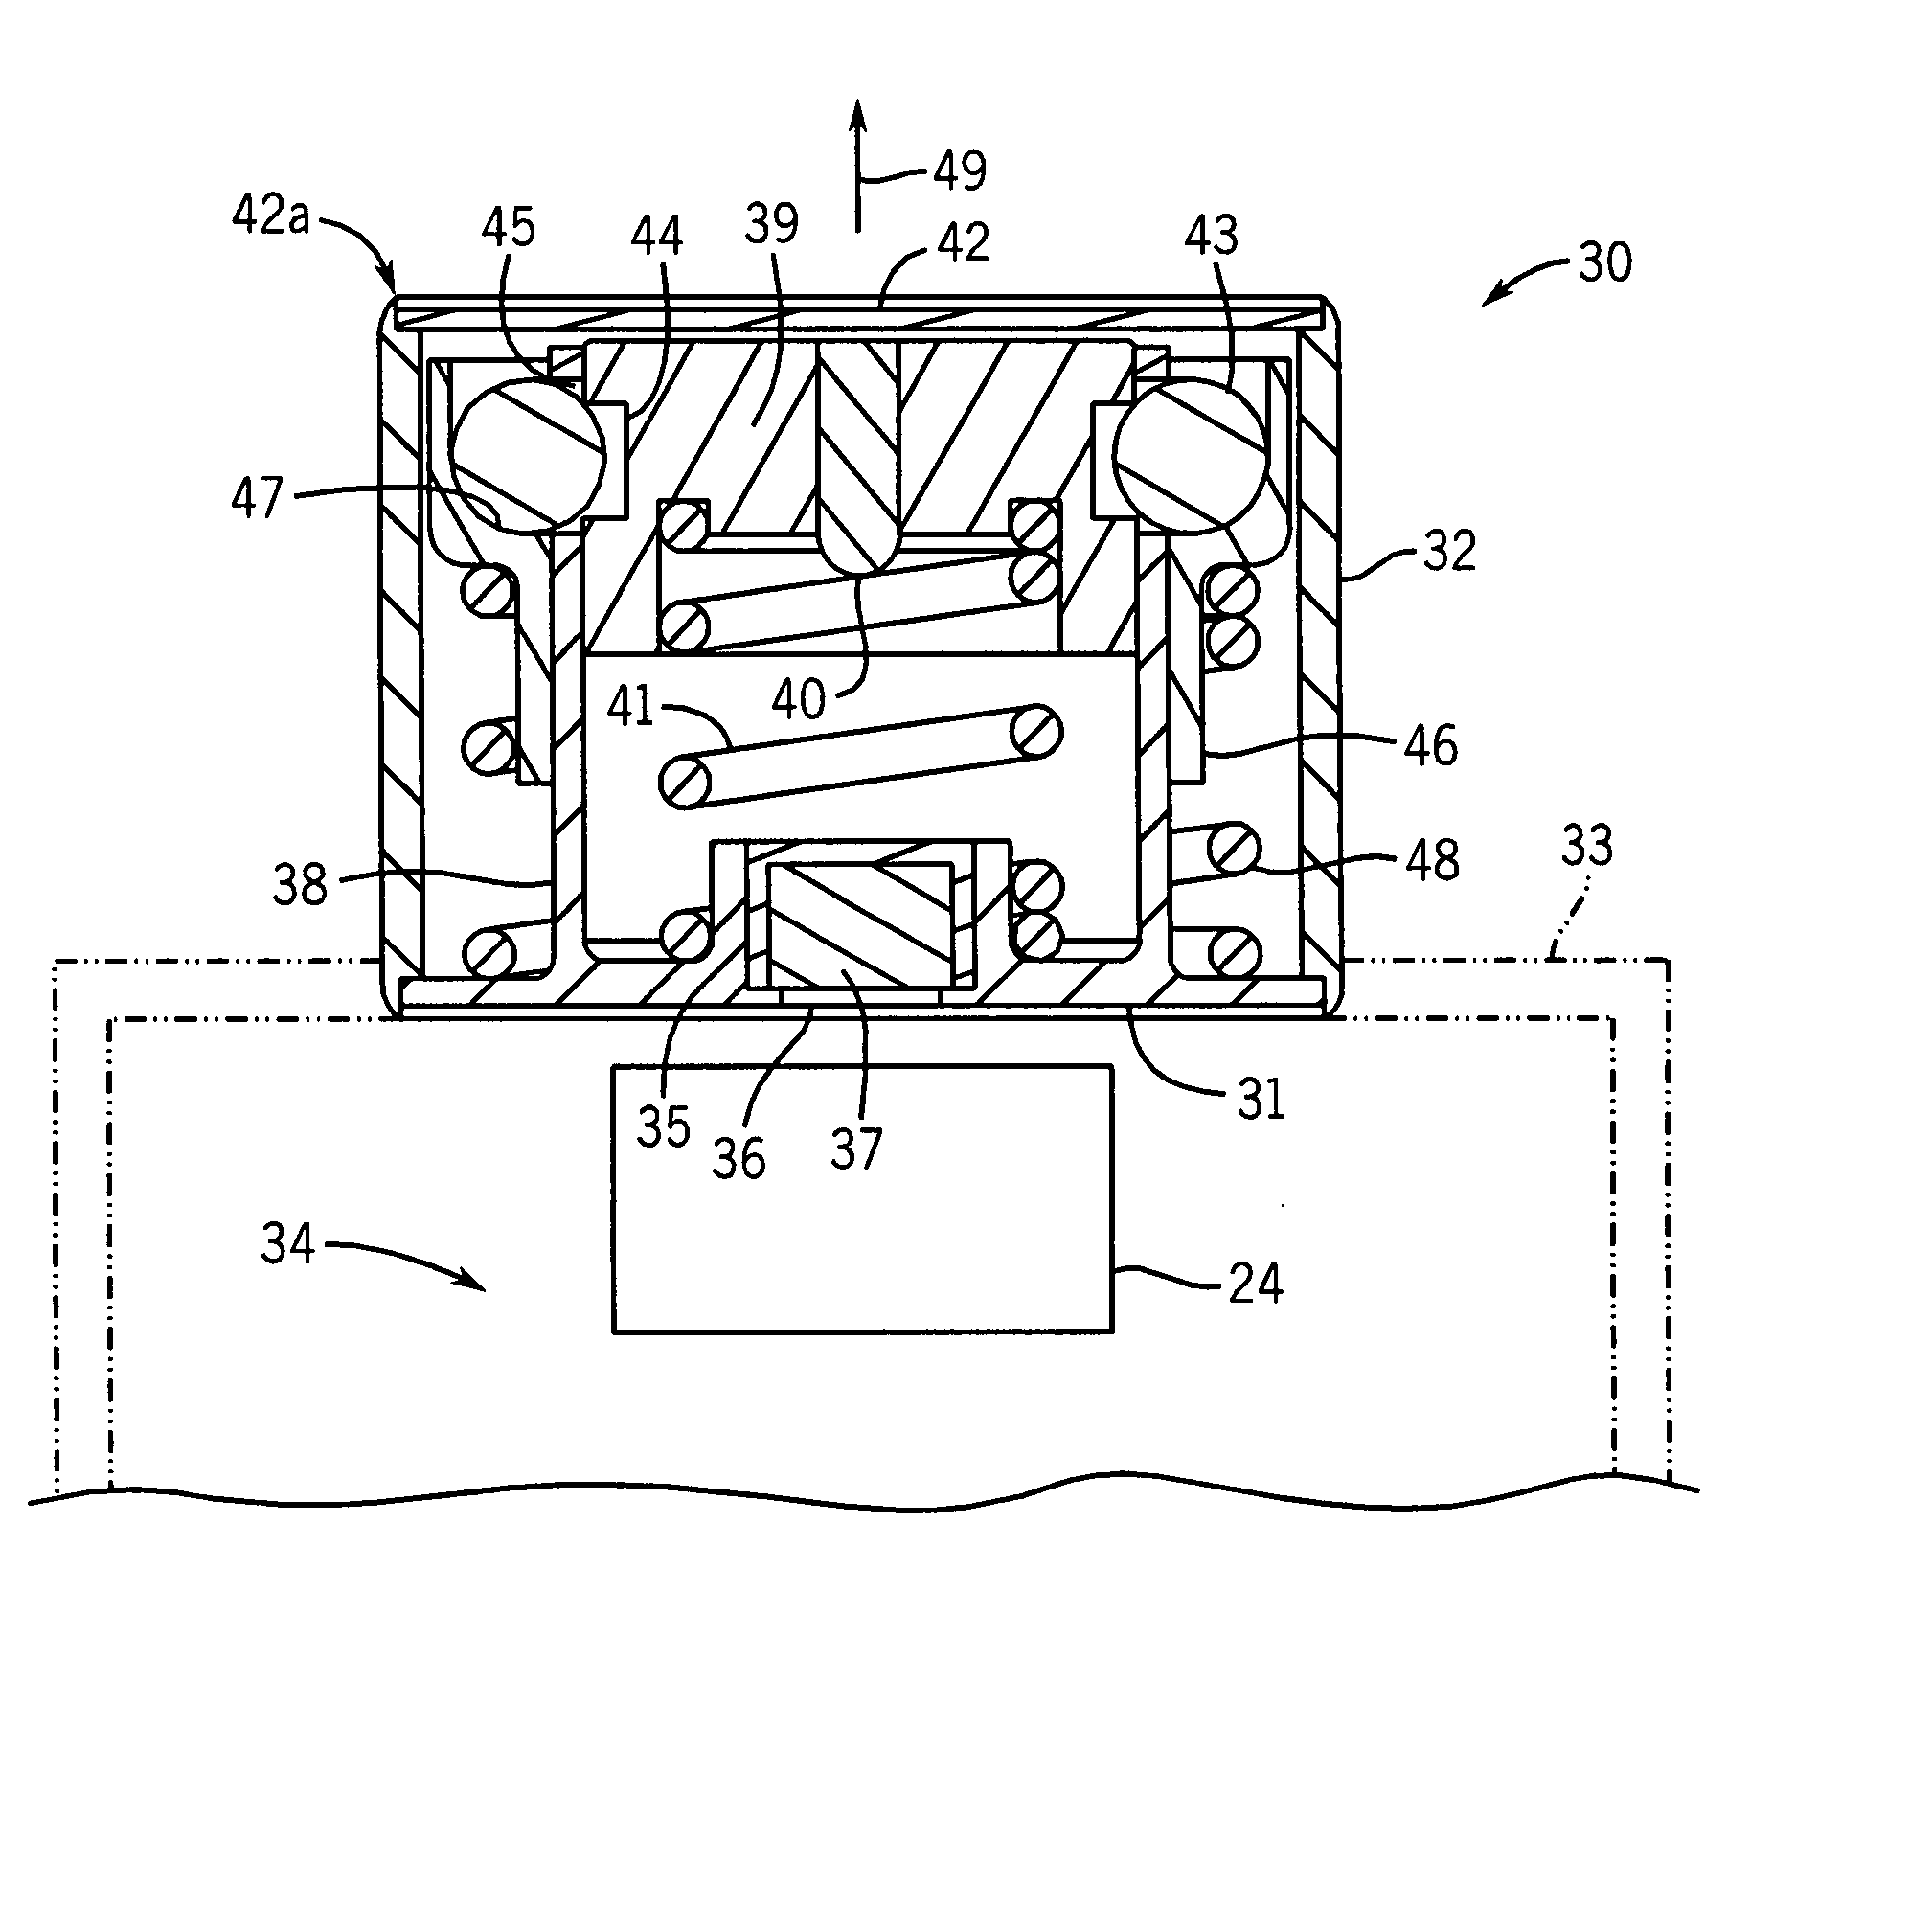 Multi-stage mechanical delay mechanisms for inertial igniters for thermal batteries and the like